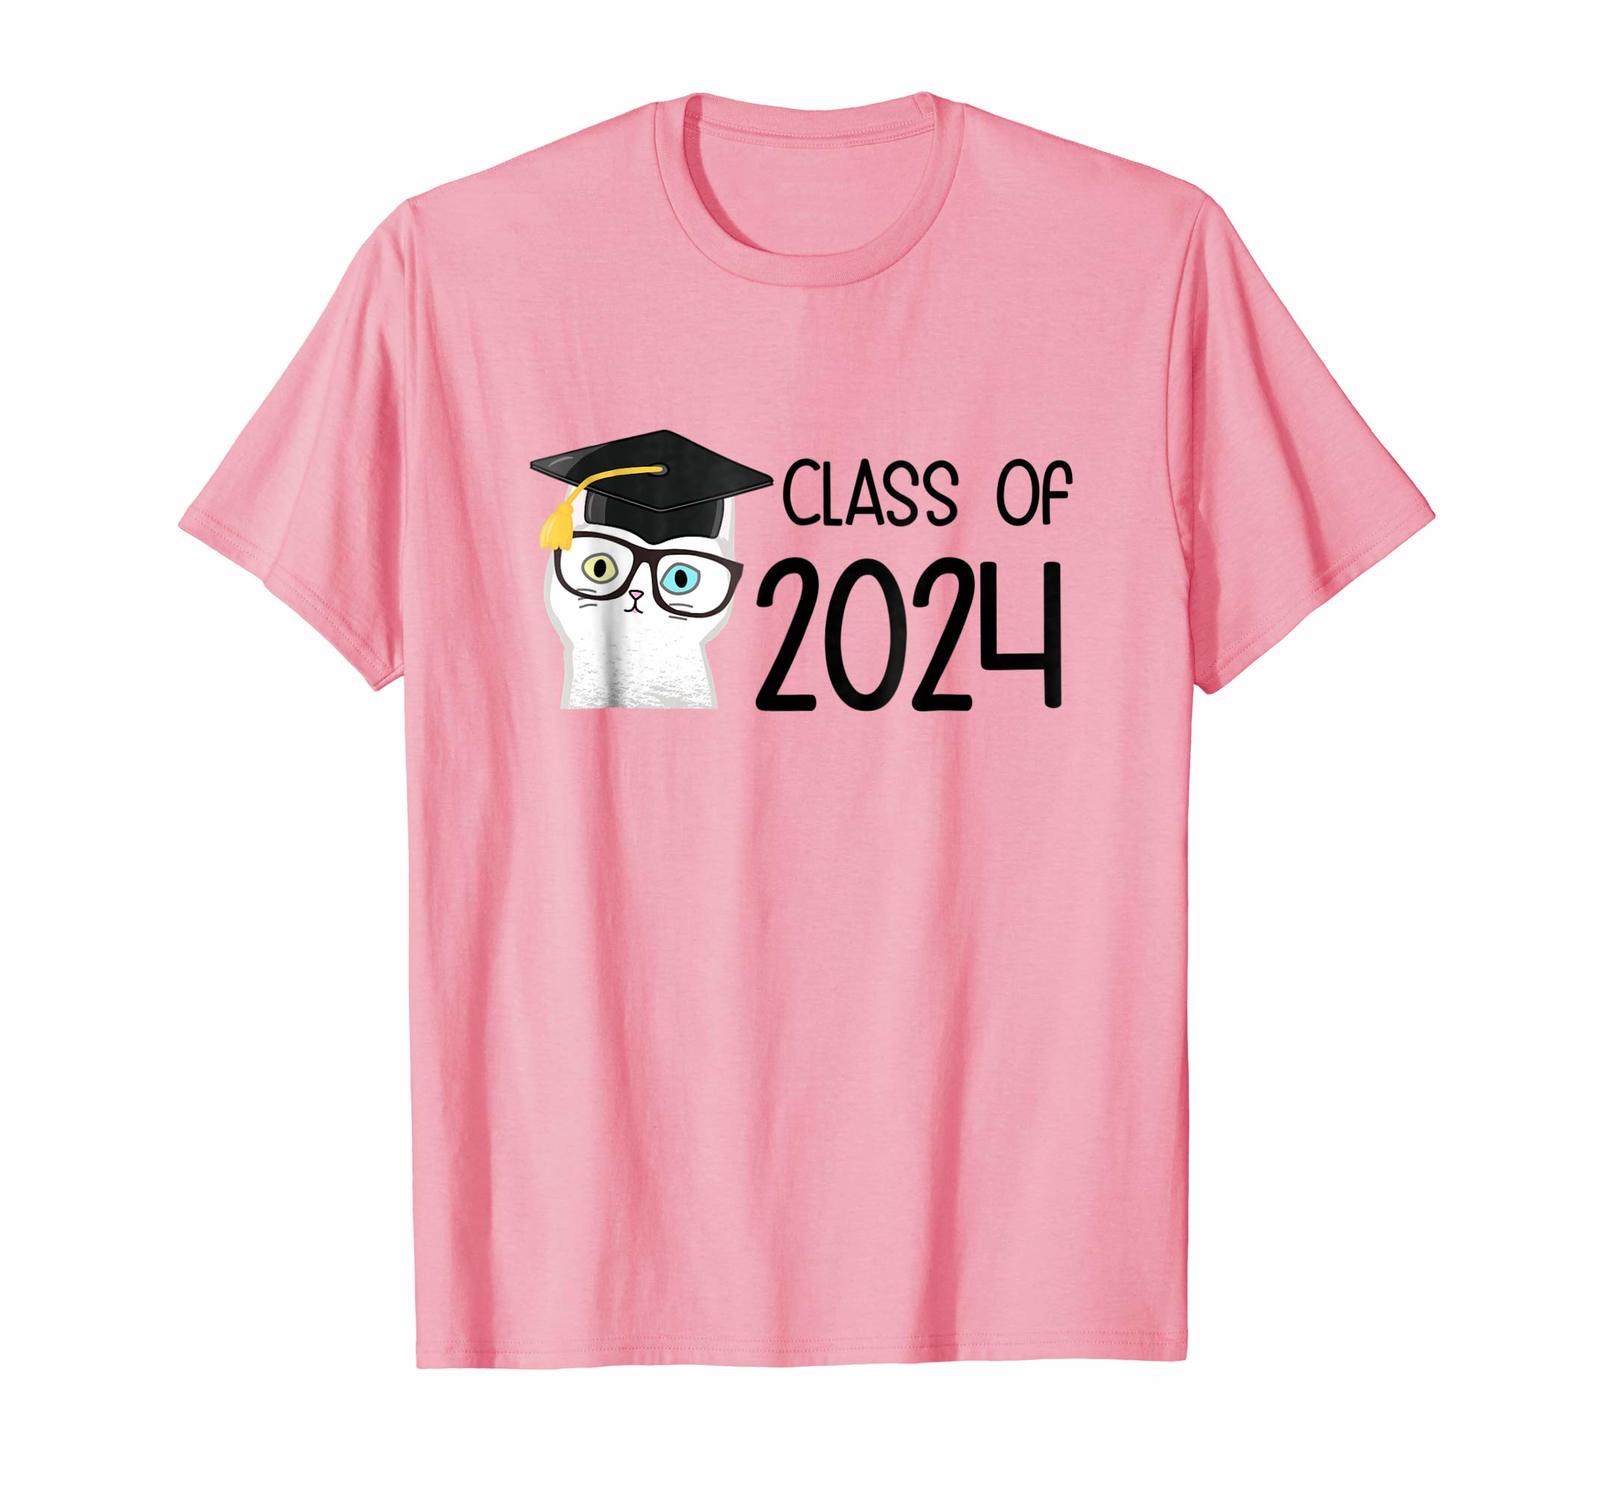 New Shirts - Class Of 2024 With Cute New T-Shirt Men - T-Shirts